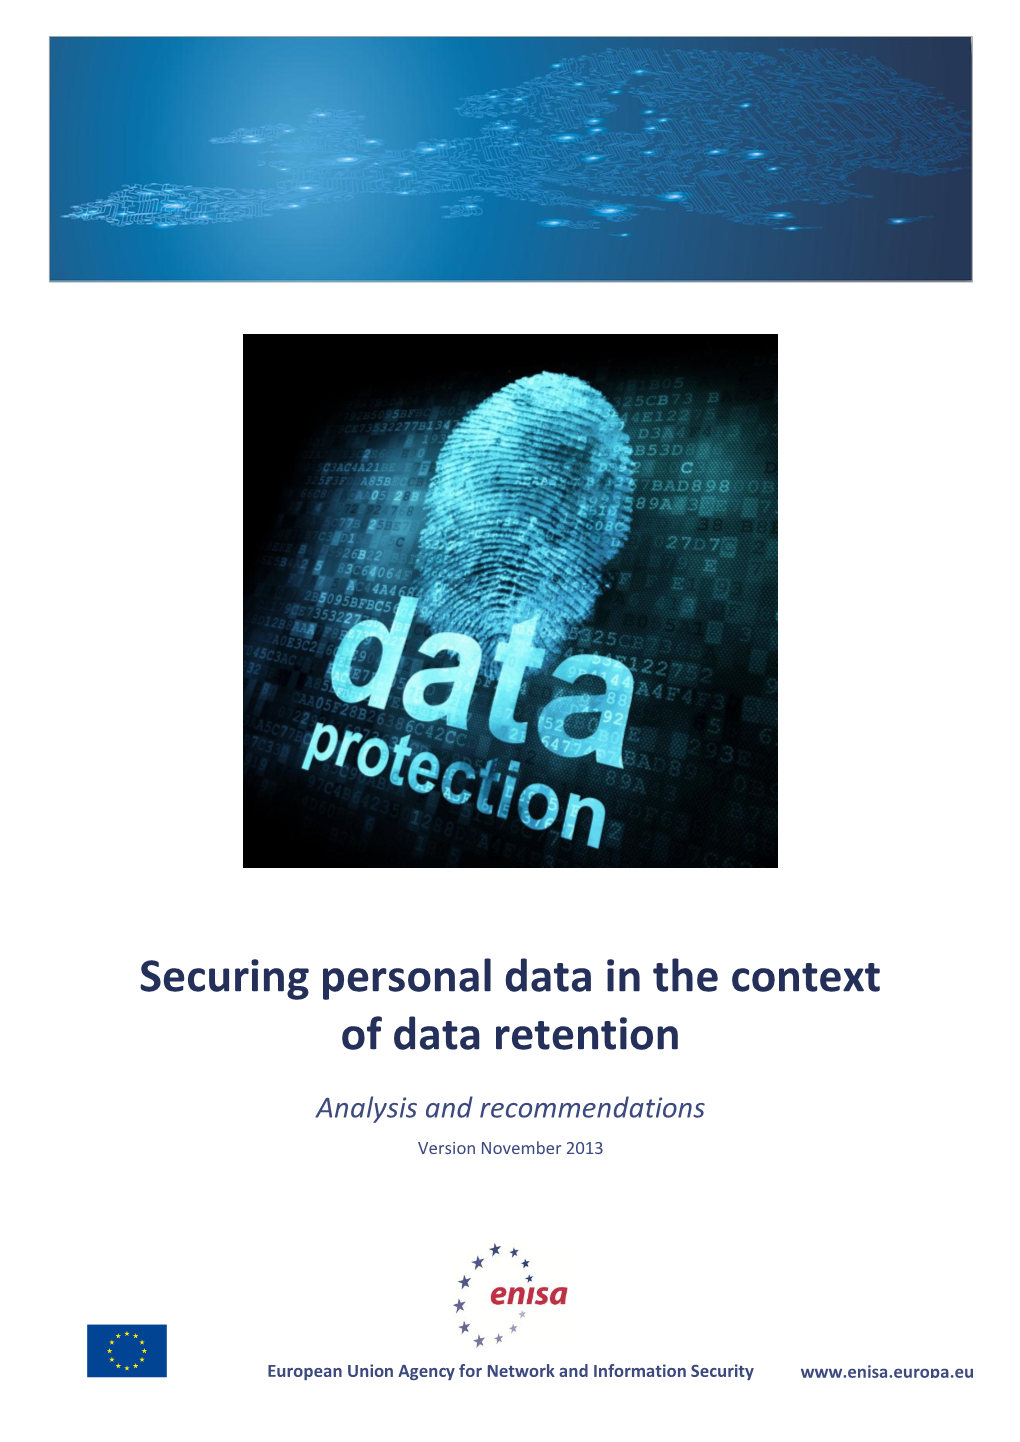 Securing Personal Data in the Context of Data Retention